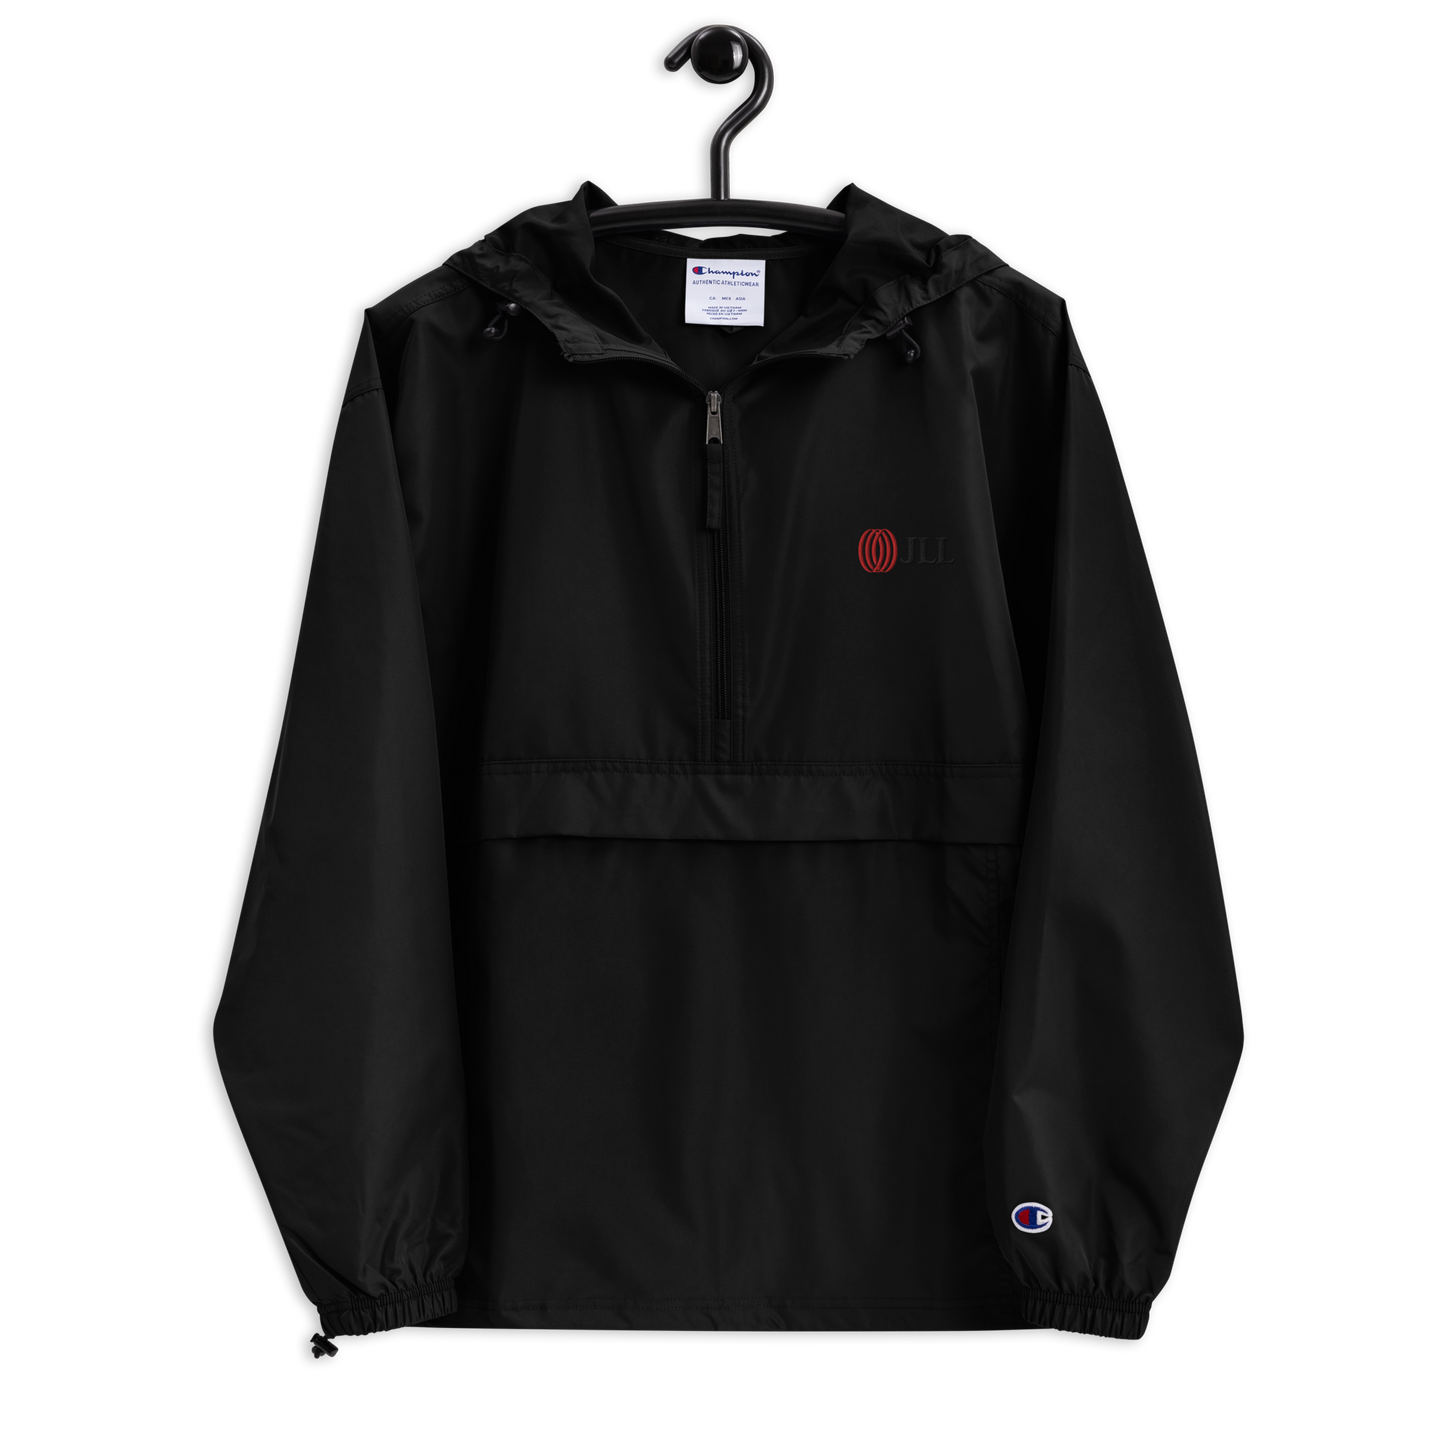 JLL Embroidered Champion Packable Jacket